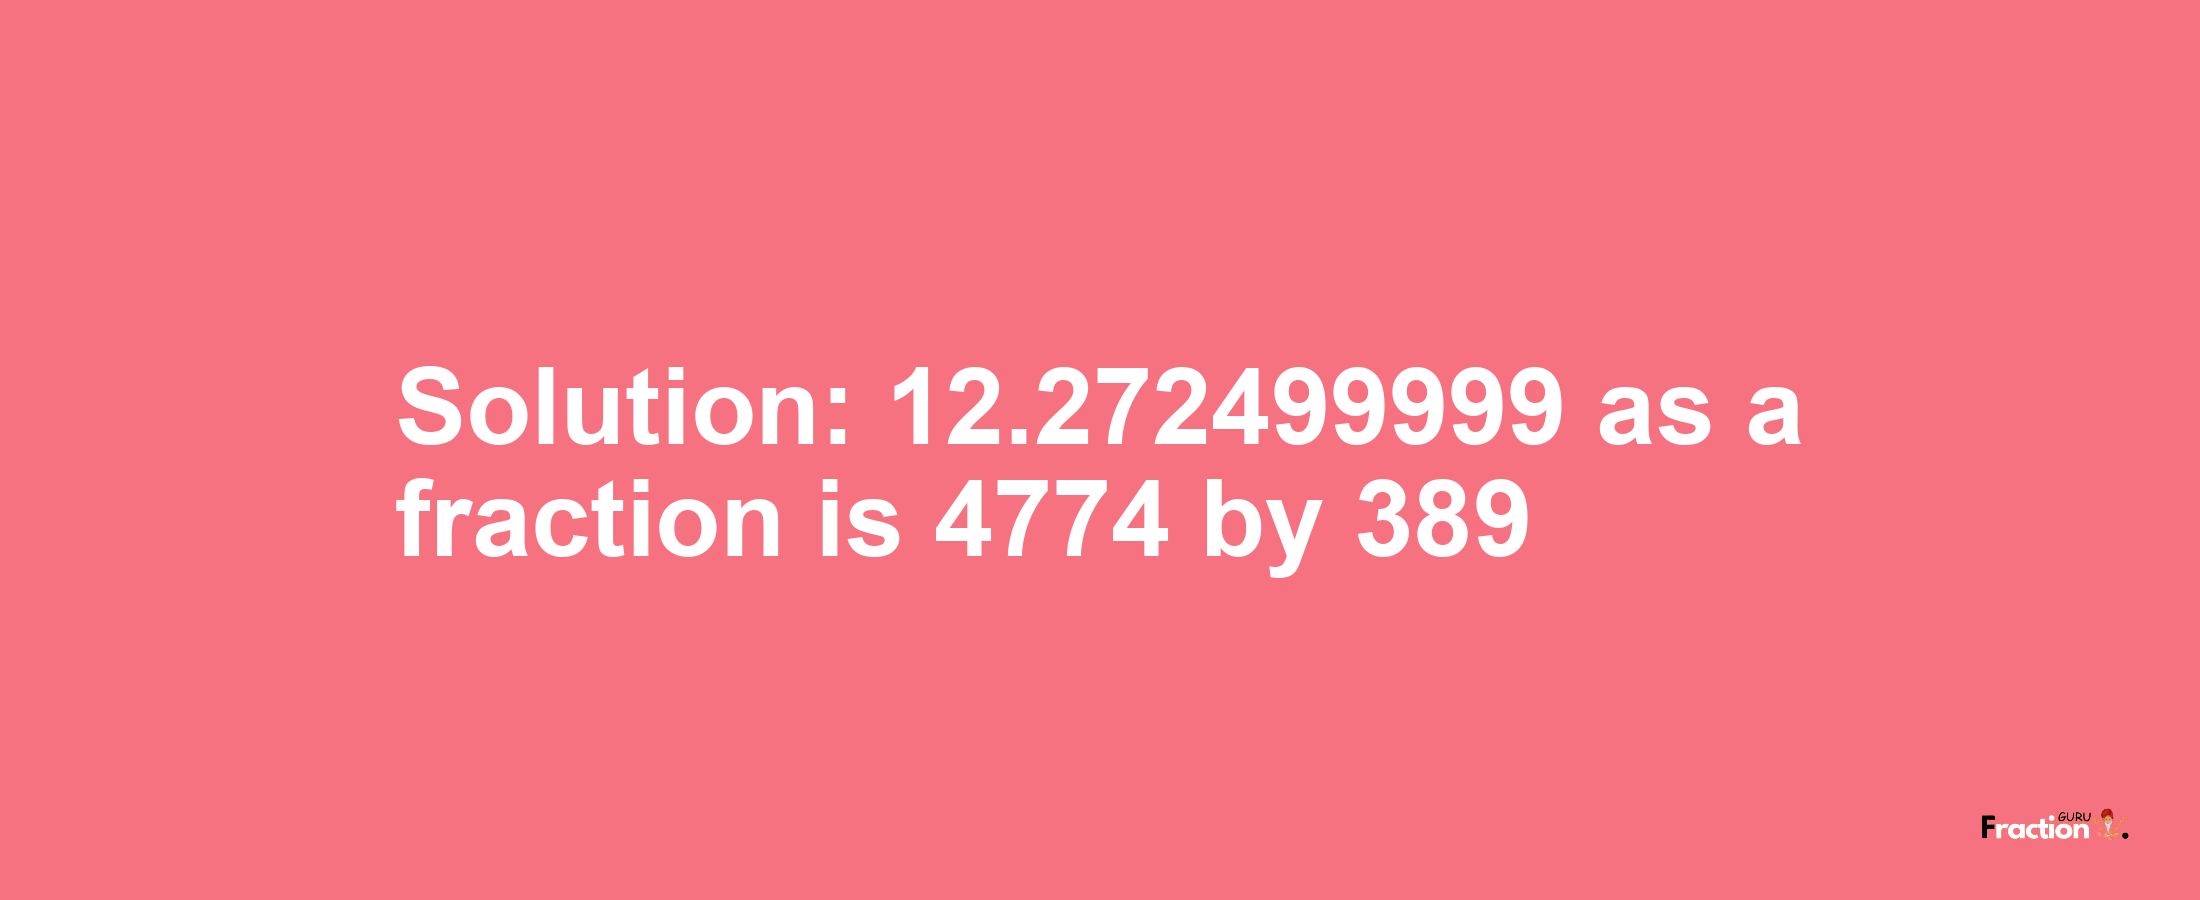 Solution:12.272499999 as a fraction is 4774/389